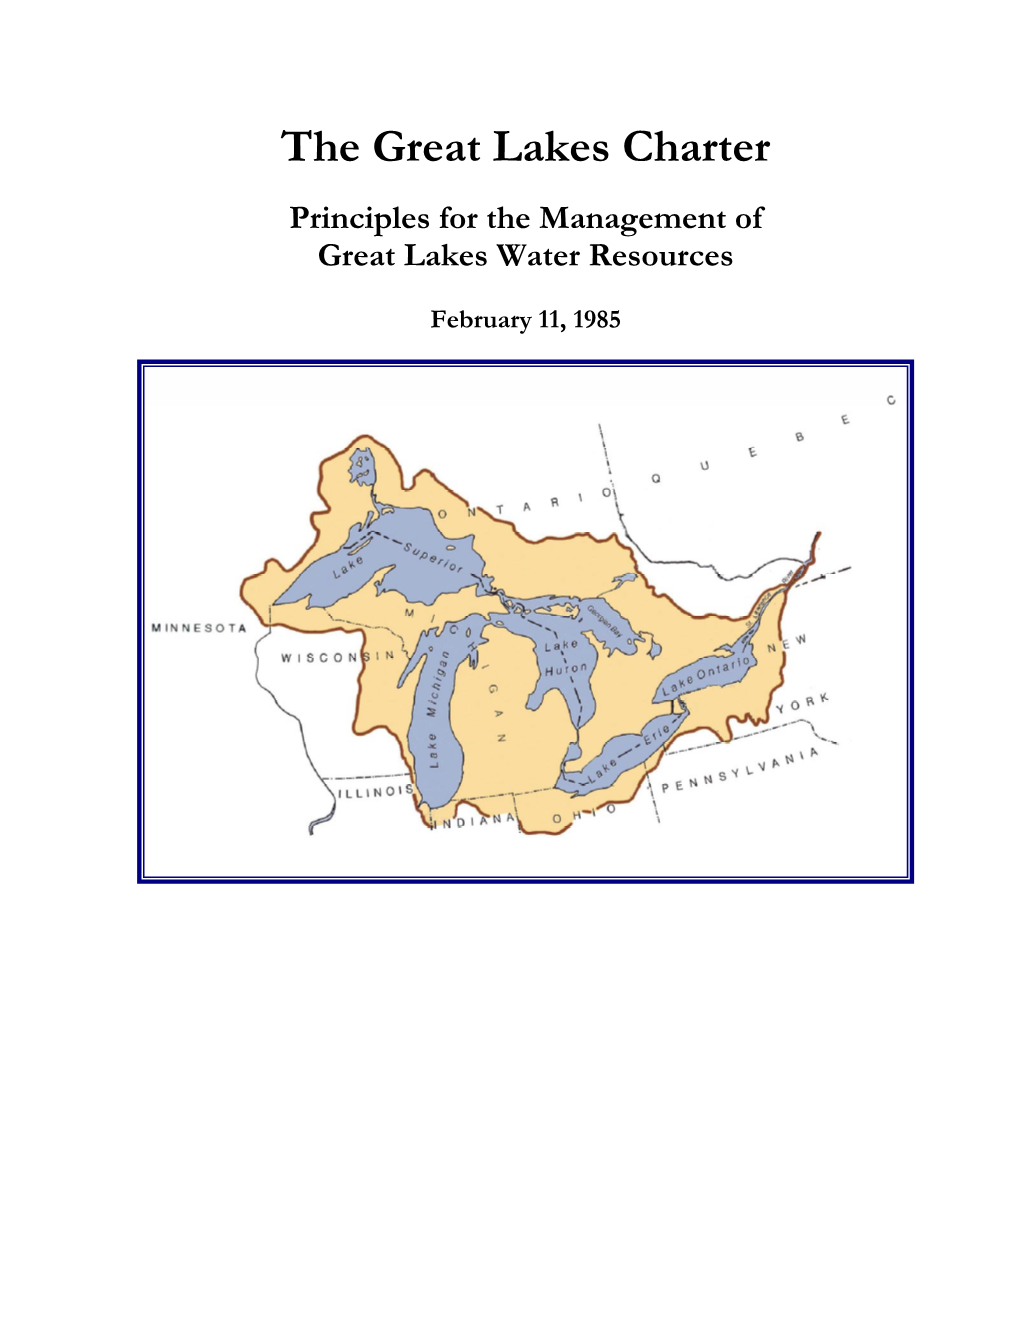 The Great Lakes Charter